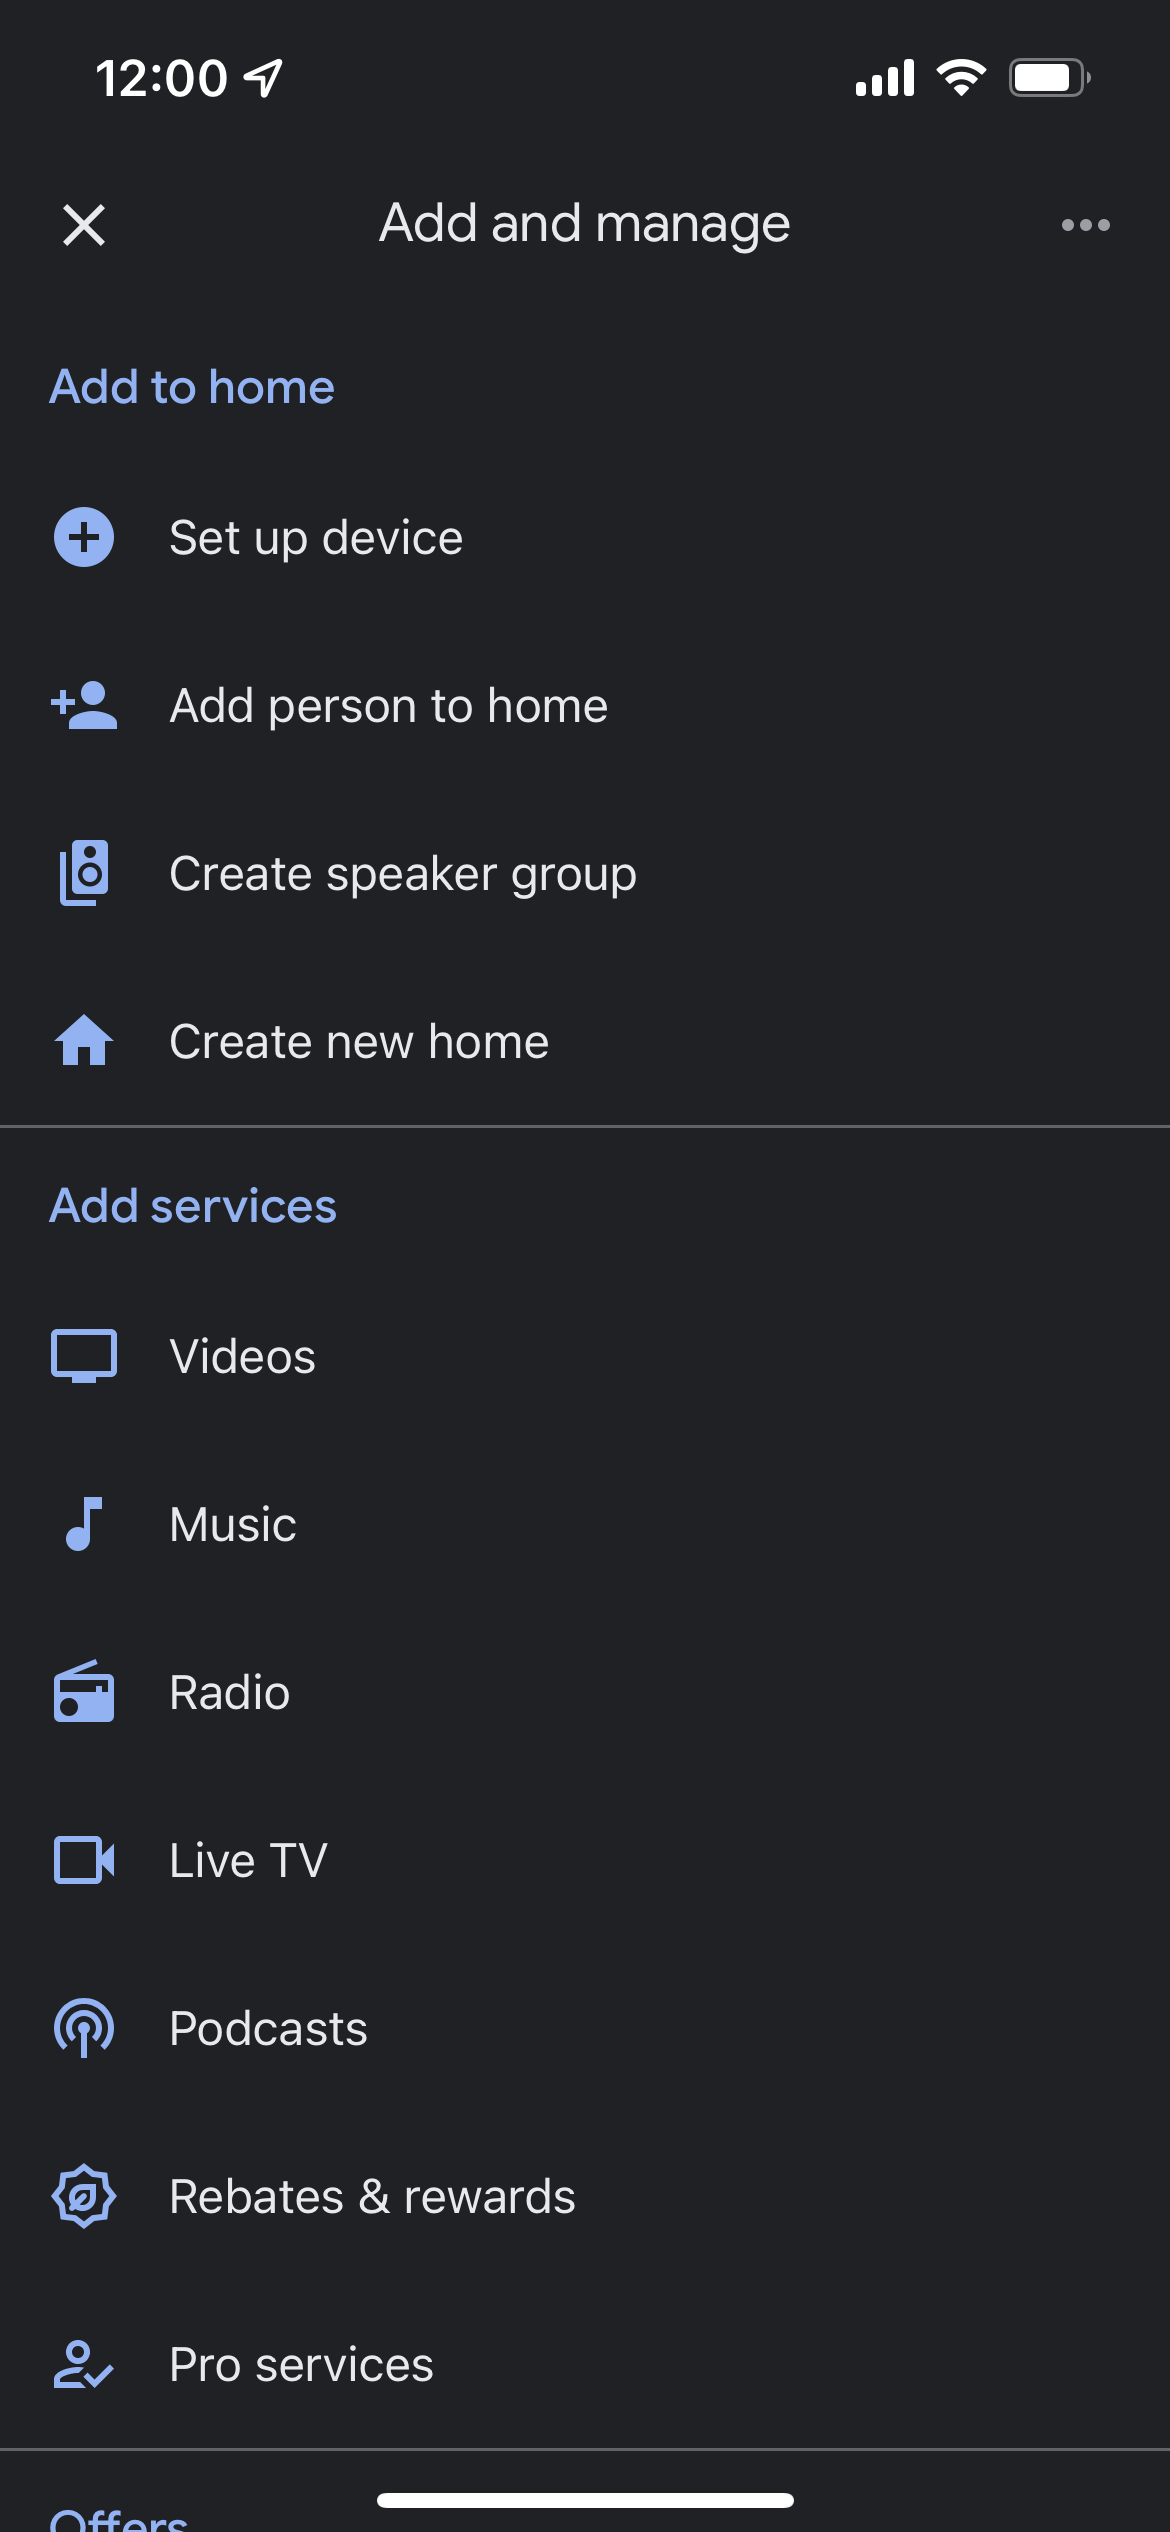 Adding and managing devices in Google Home